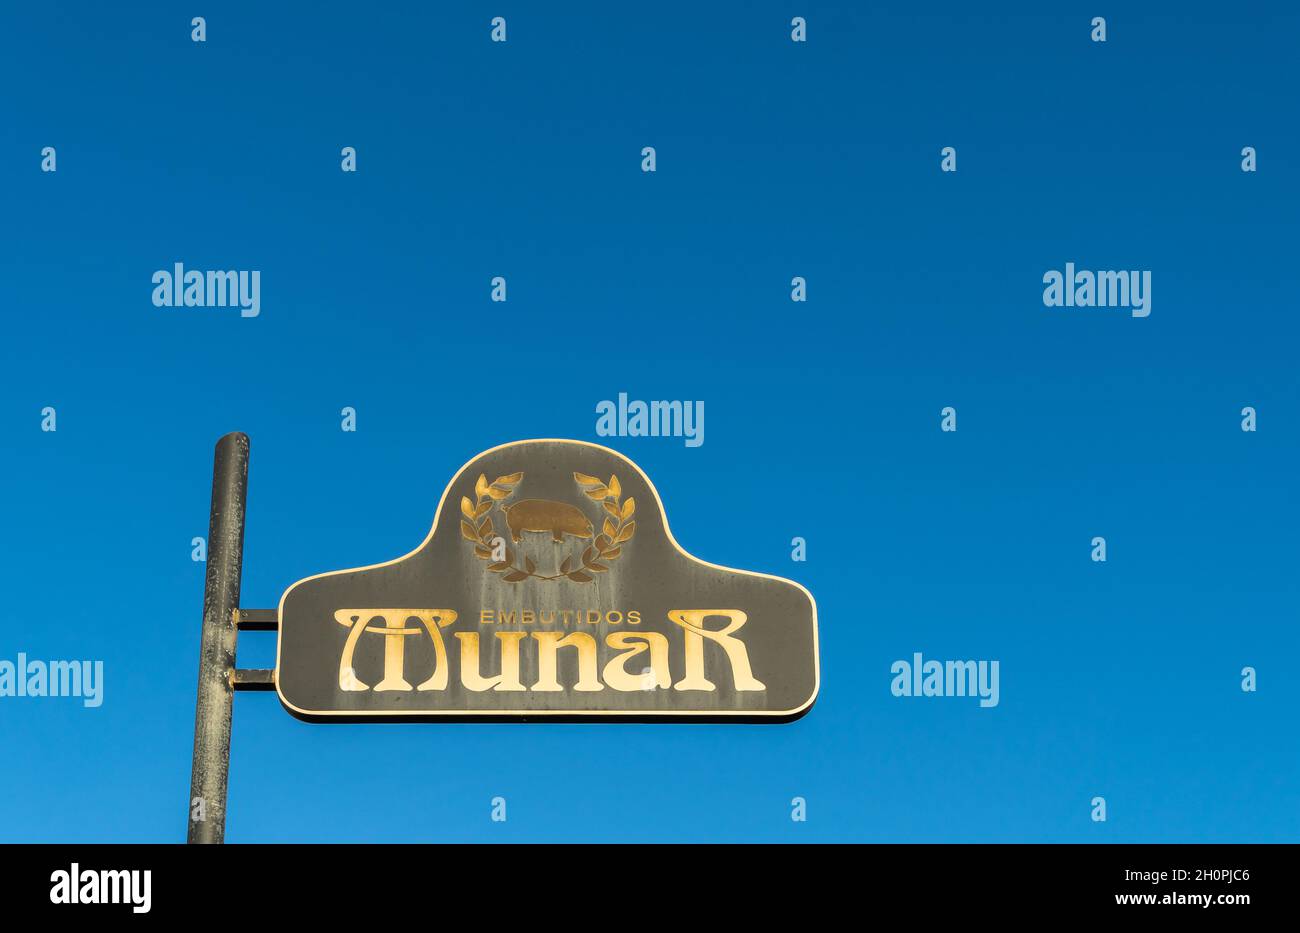 Munar sausage factory at dawn. Close-up of the logo on an advertising pole. Located in the Majorcan town of Porreres, Balearic Islands, Spain Stock Photo